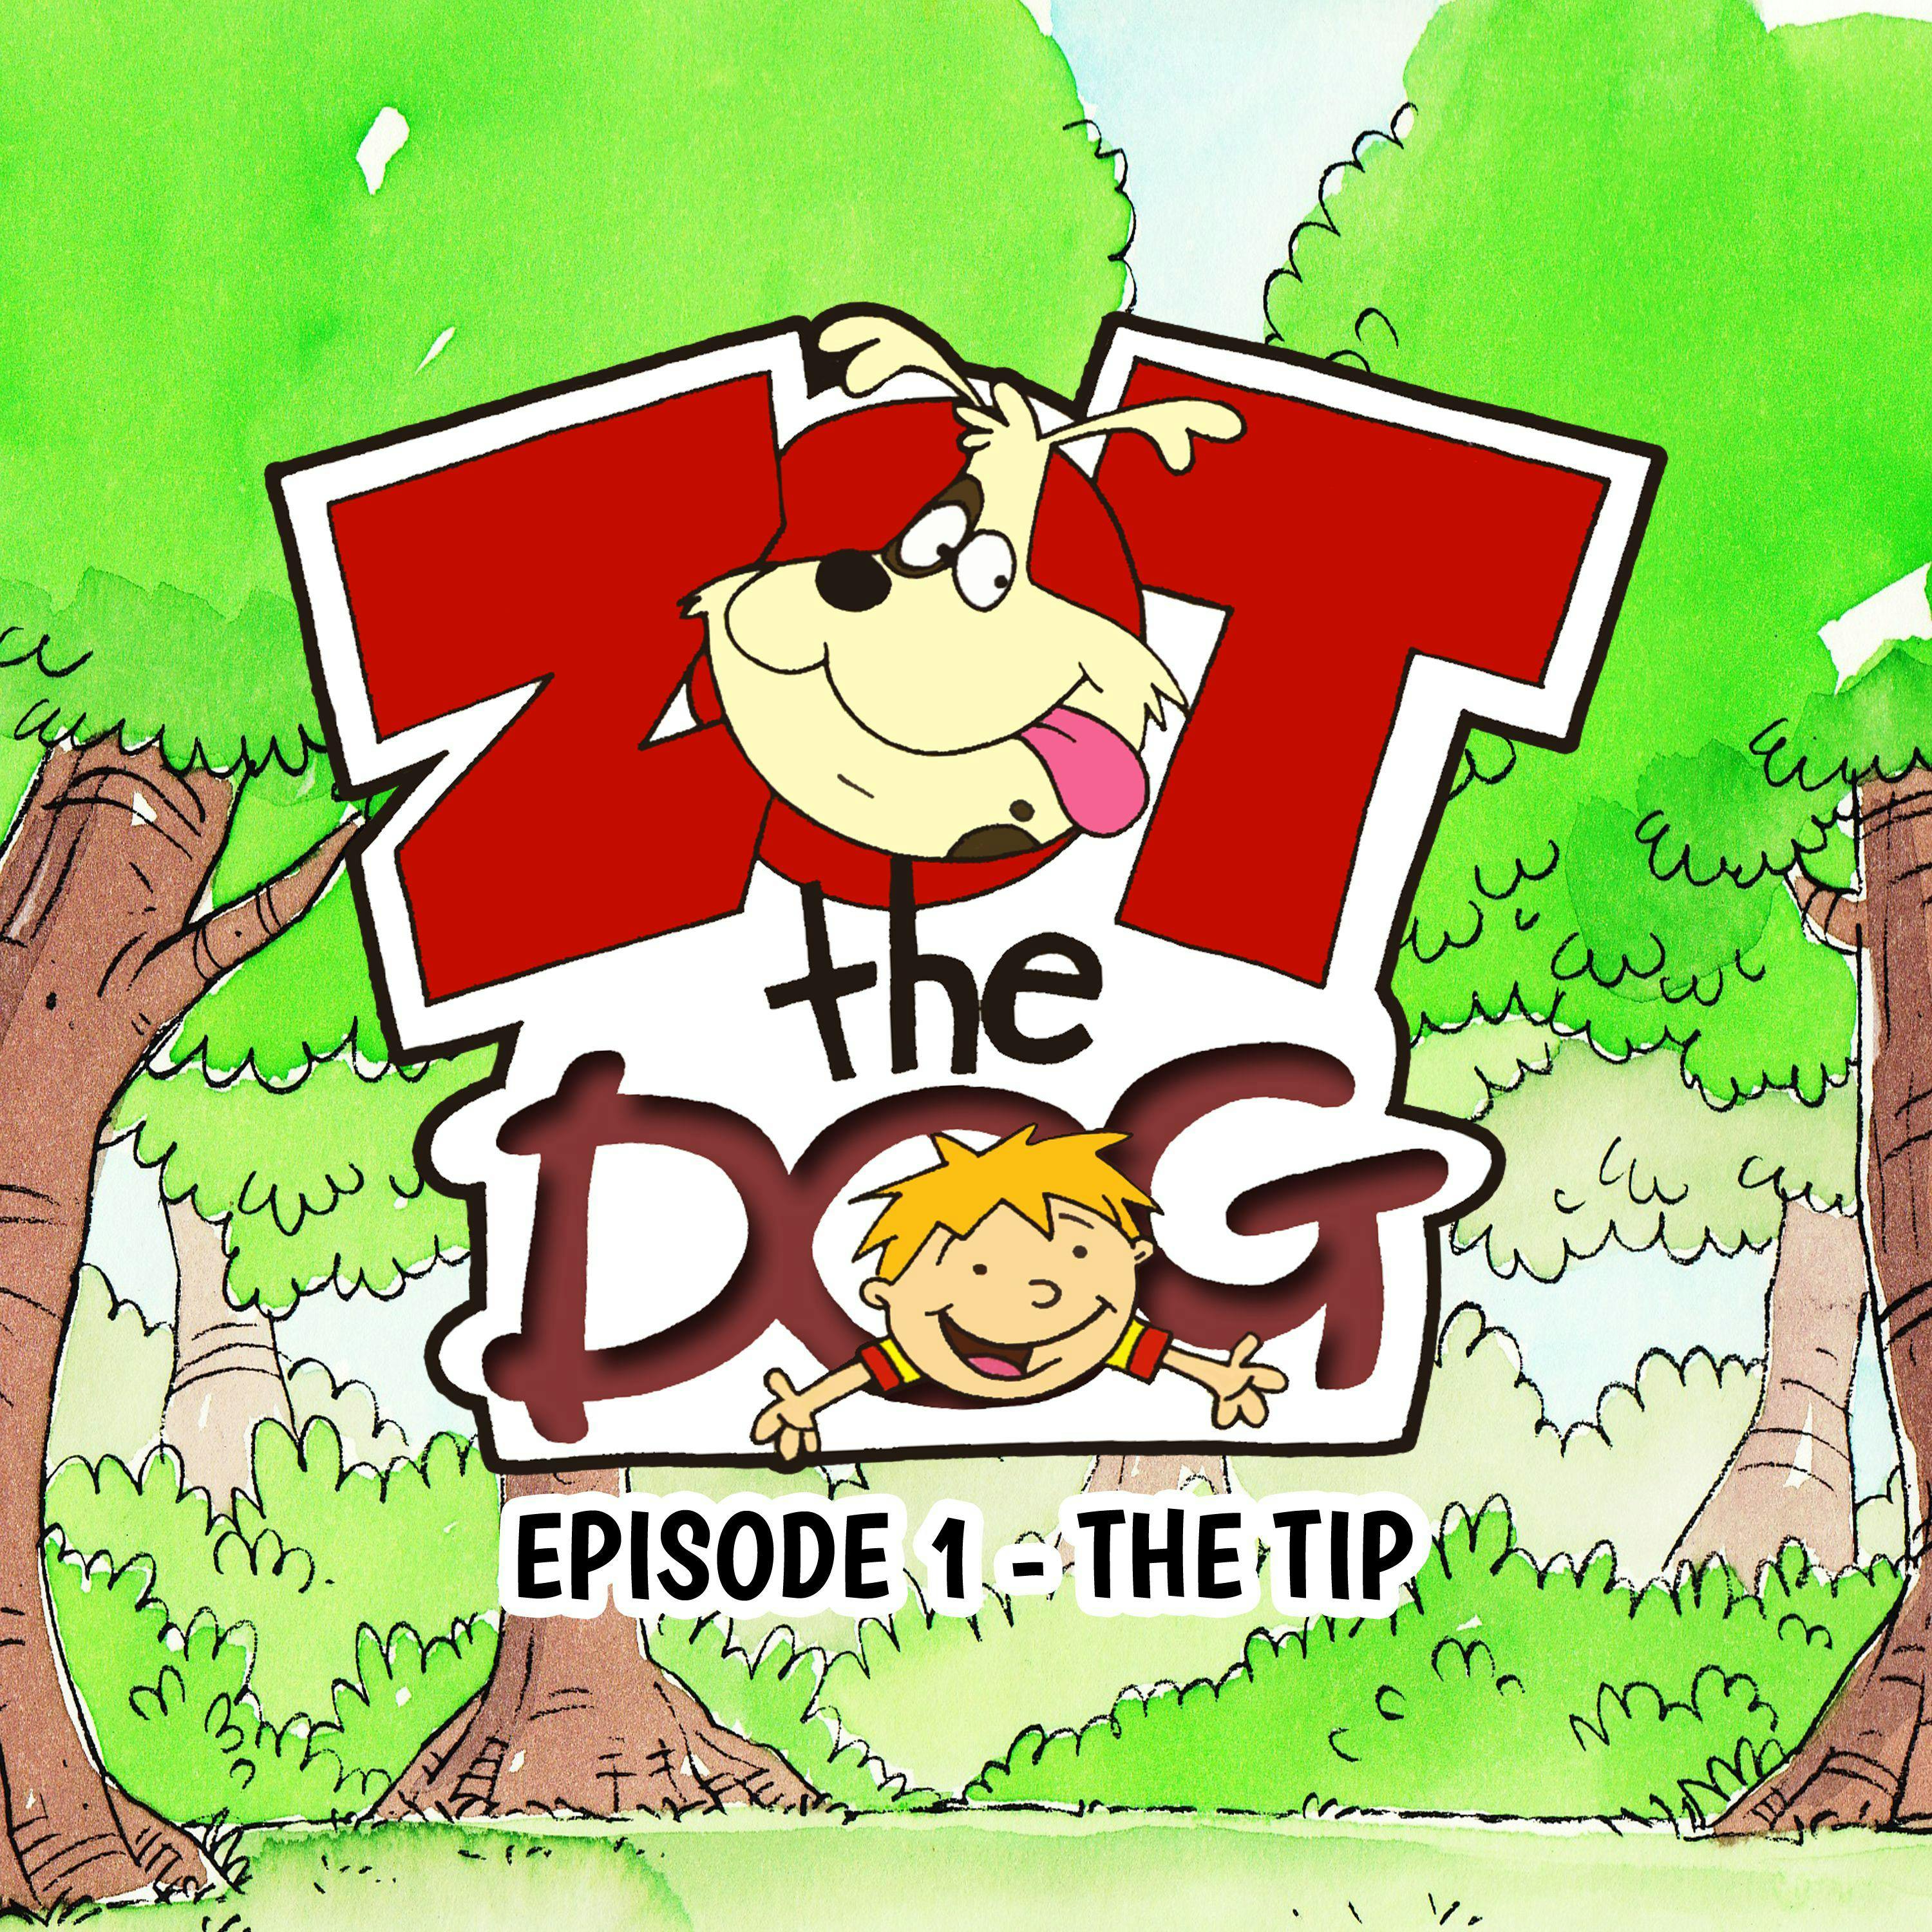 Zot the Dog: Episode 1 - The Tip - undefined